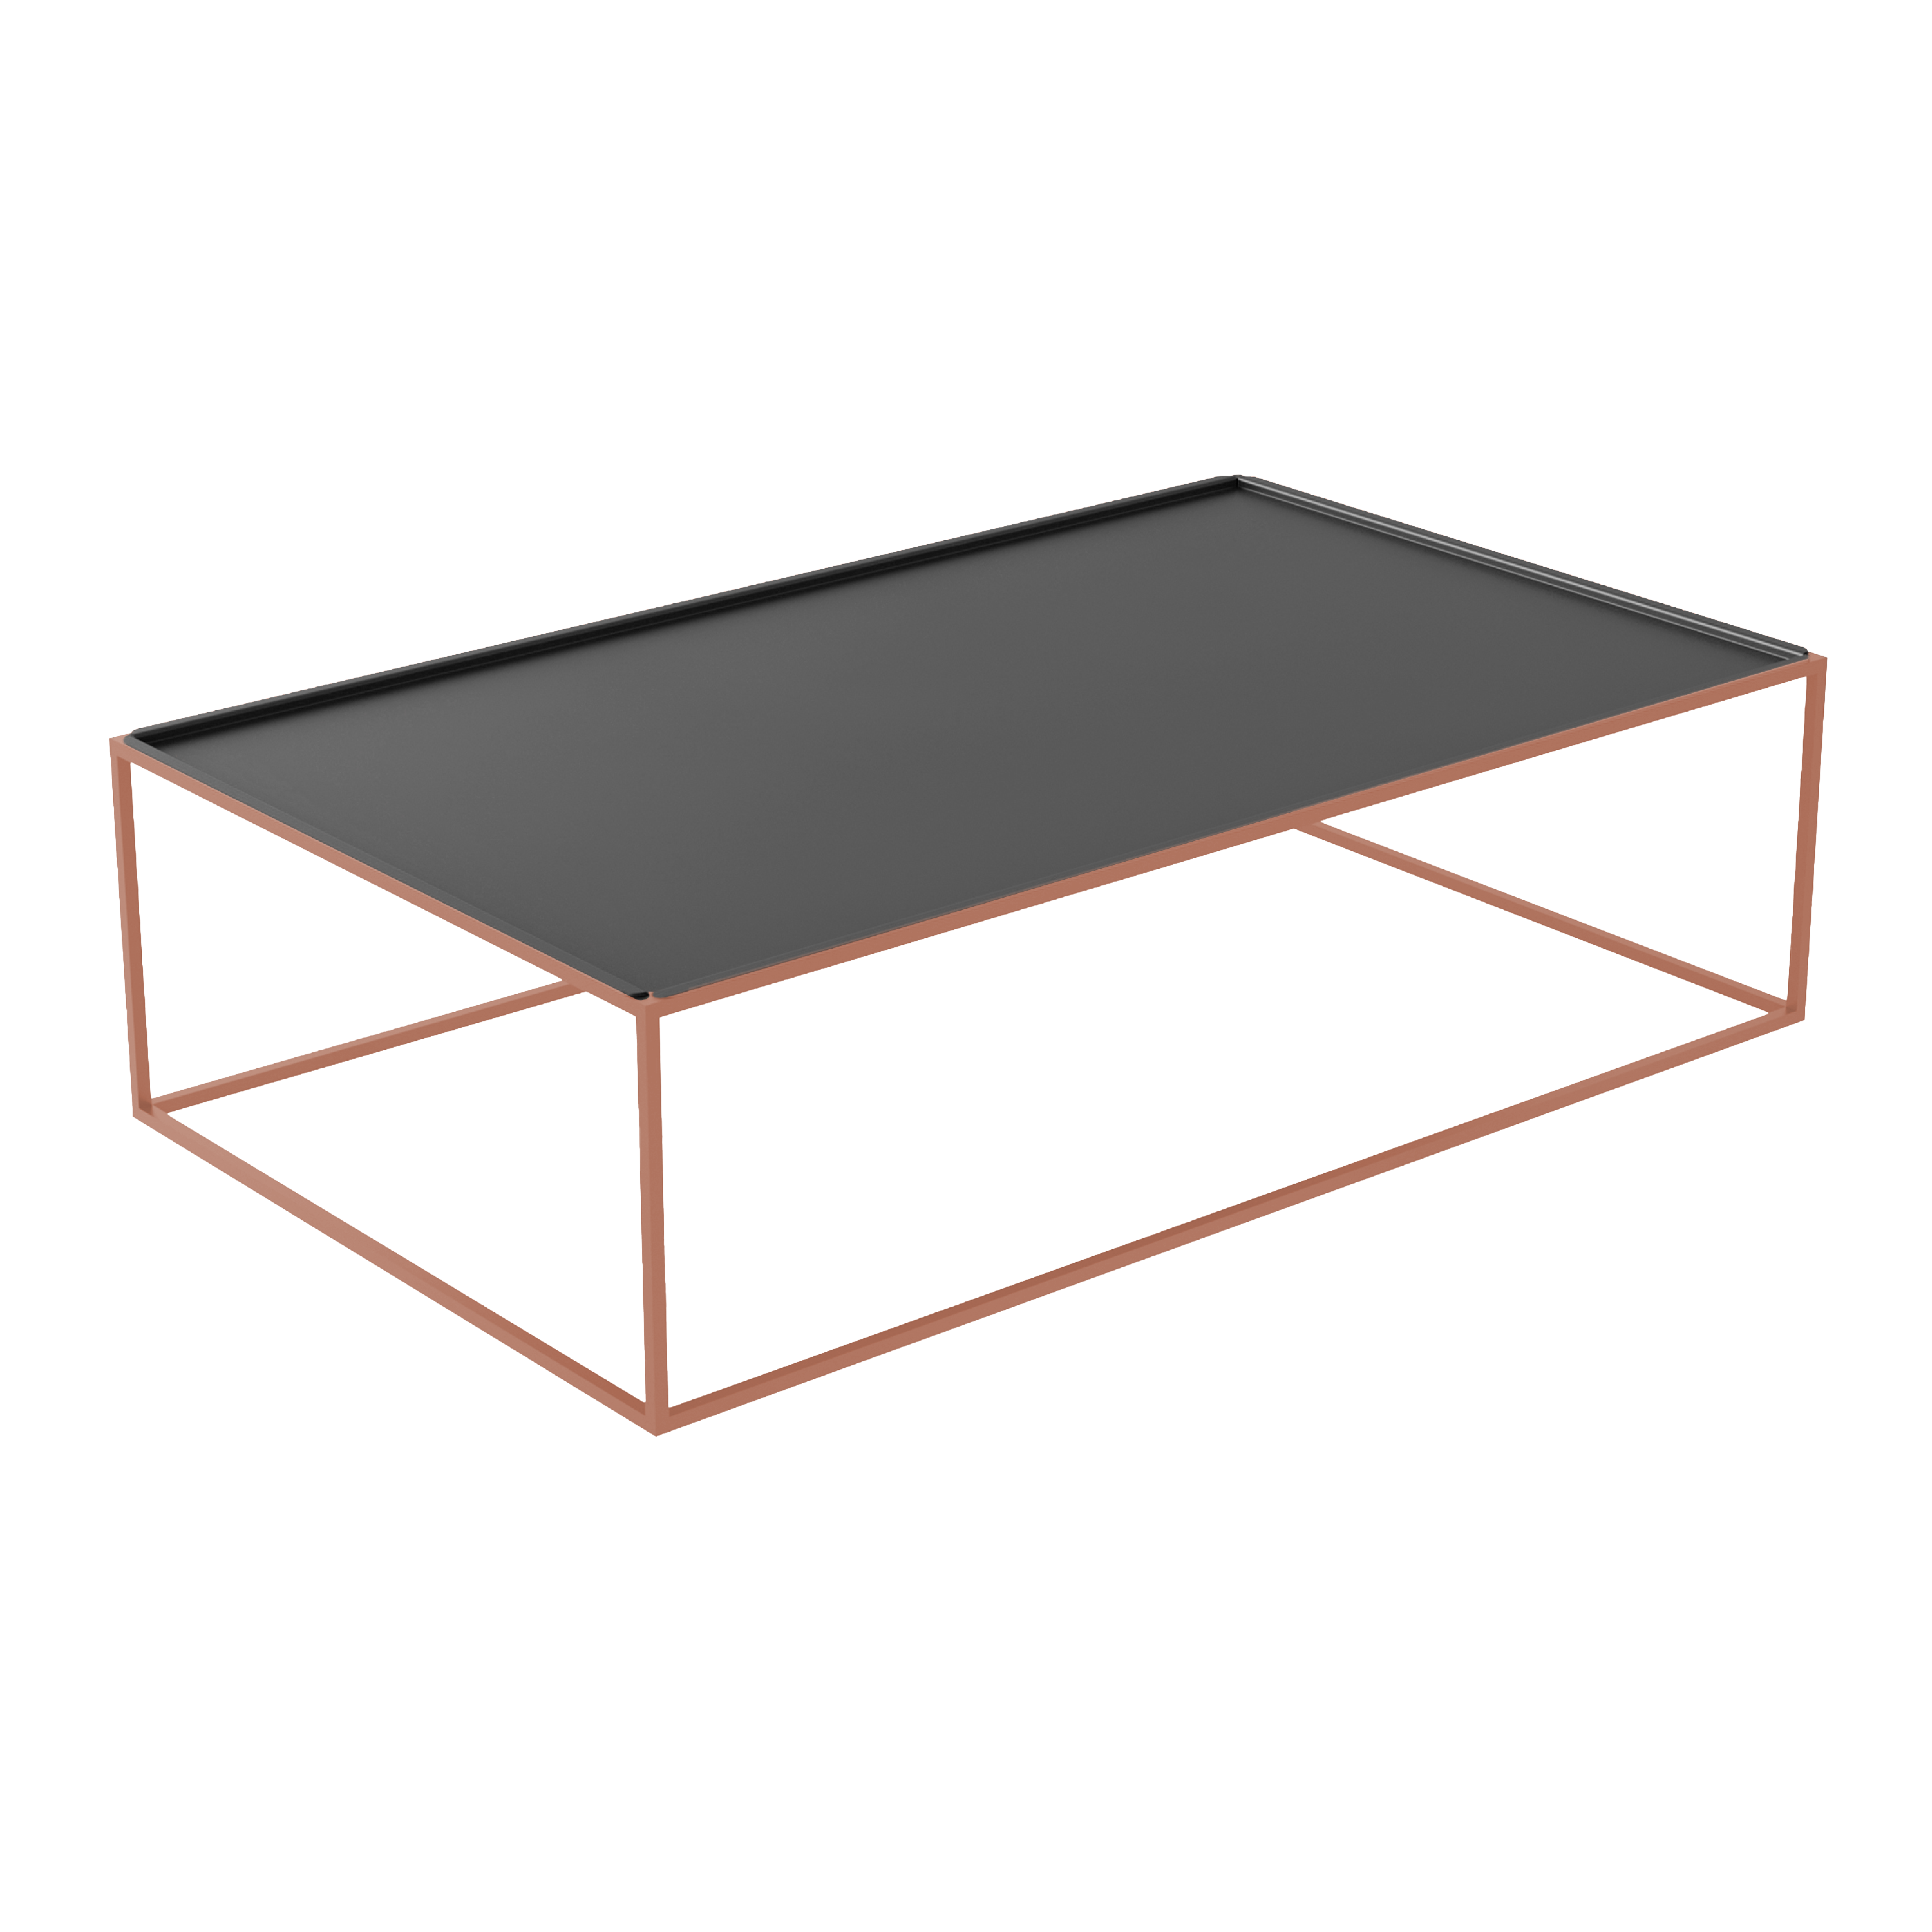 WS - Settle Coffee Table Low - 1000x600x270